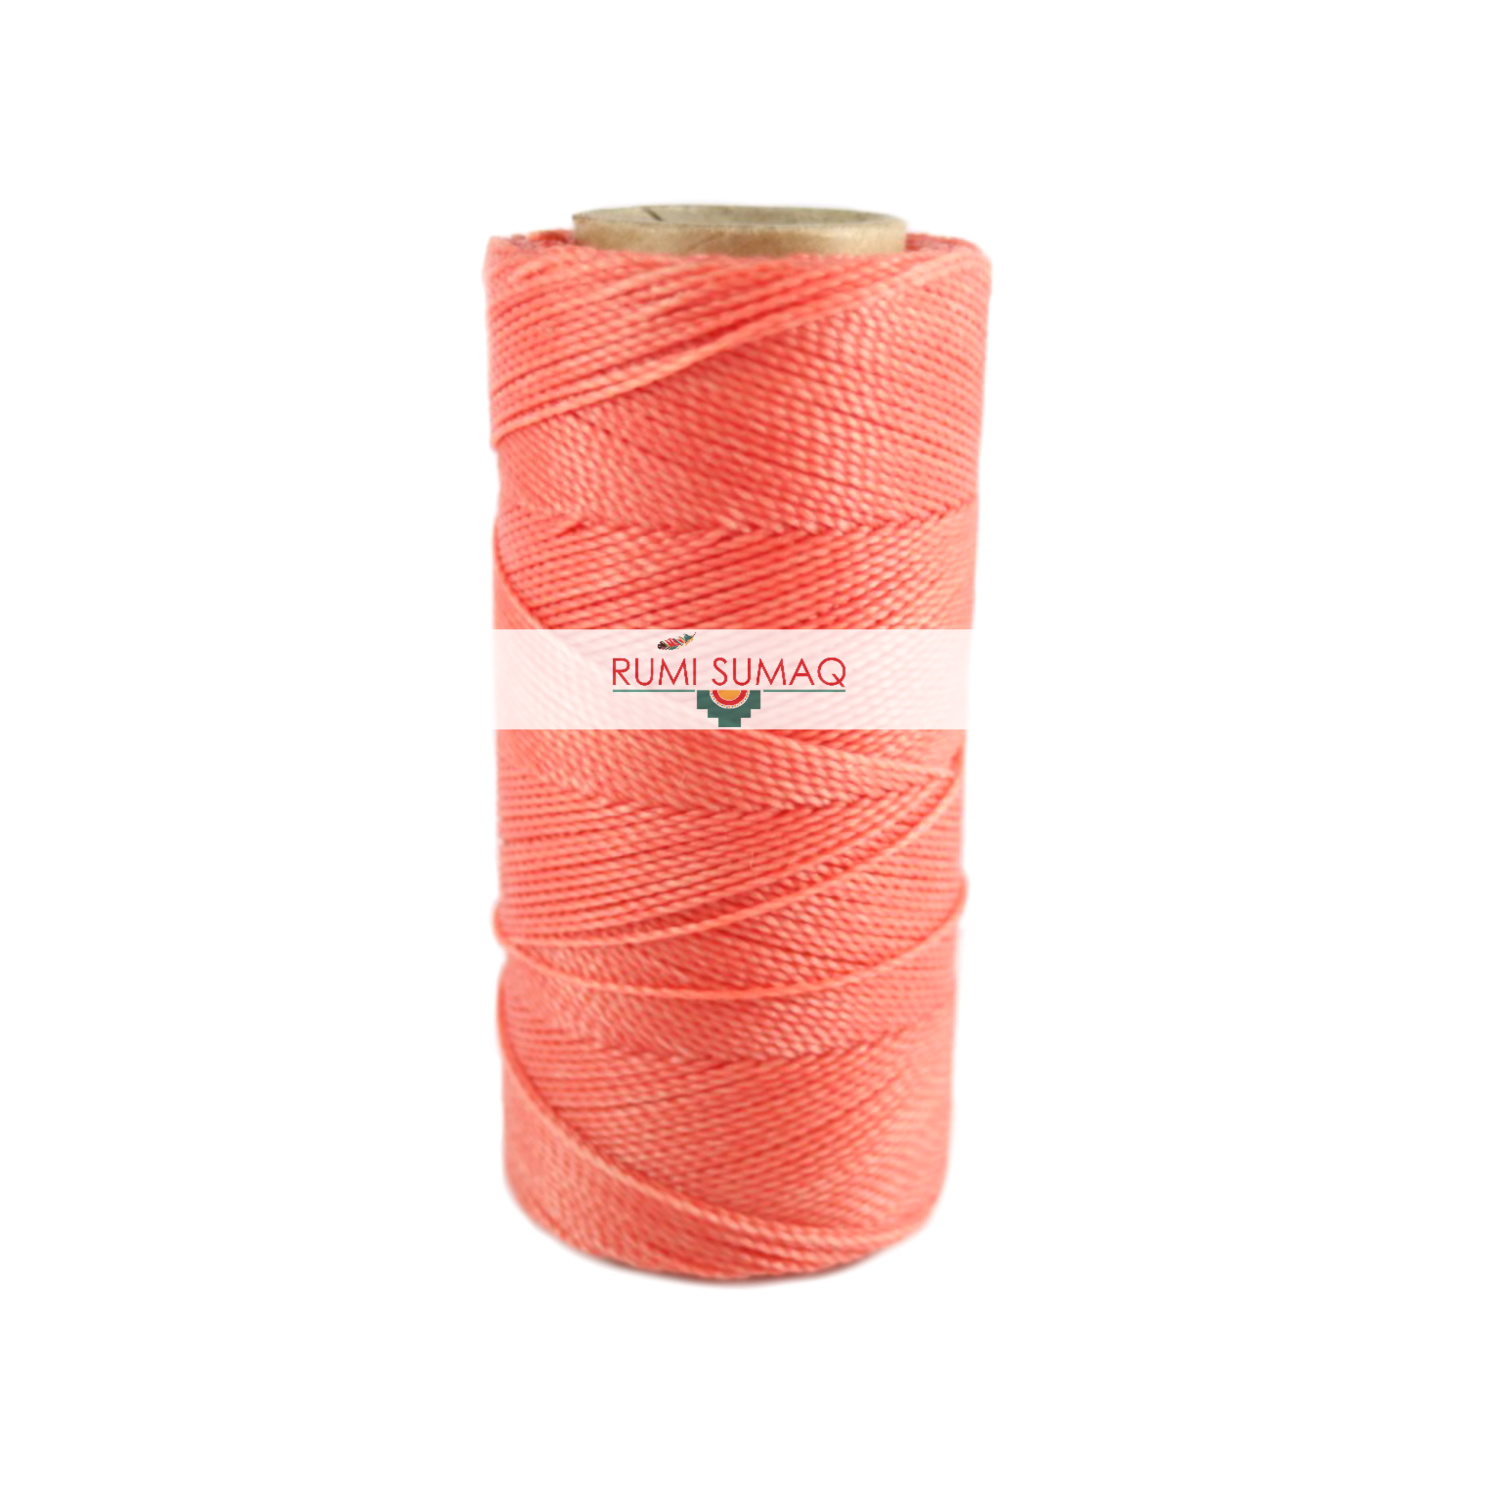 Sell Bonded <a href='/polyester-cord-strapping/'>Polyester Cord Strapping</a>(id:24301380) - EC21